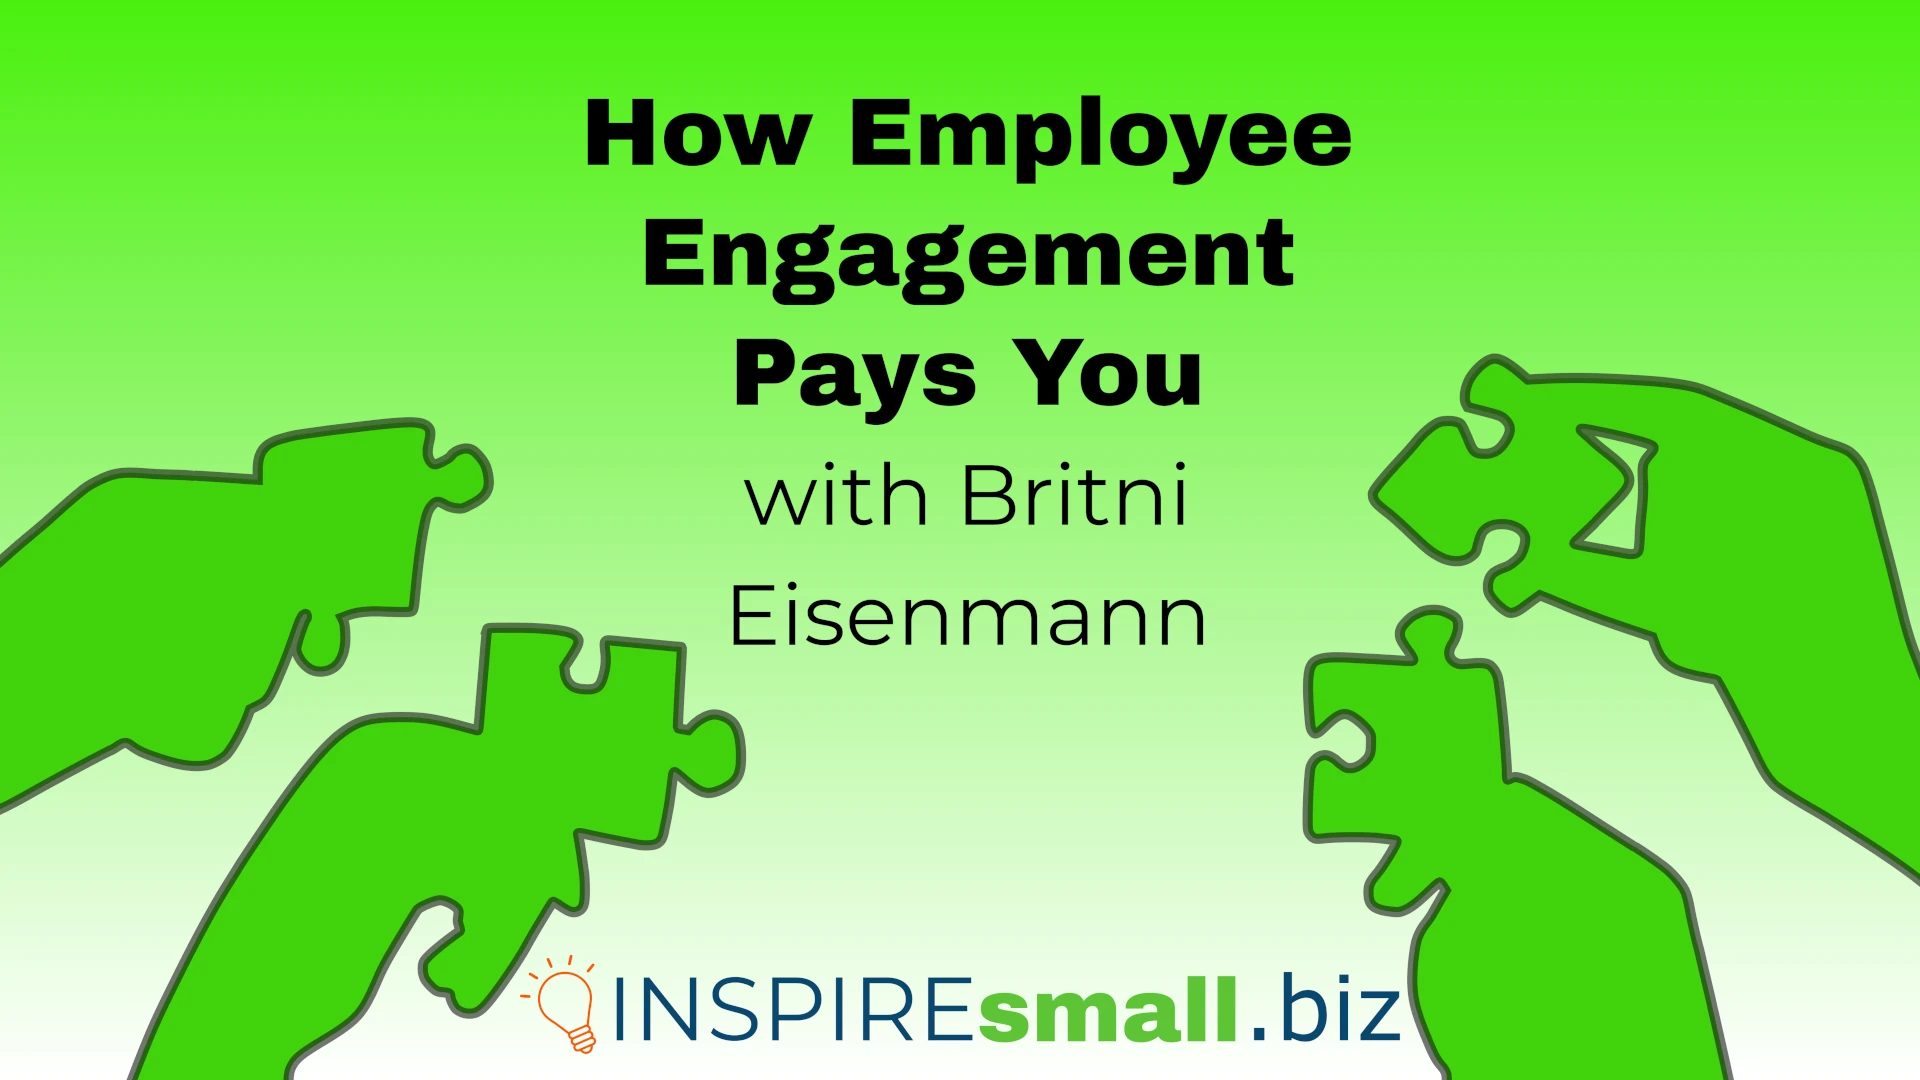 How Employee Engagement Pays You